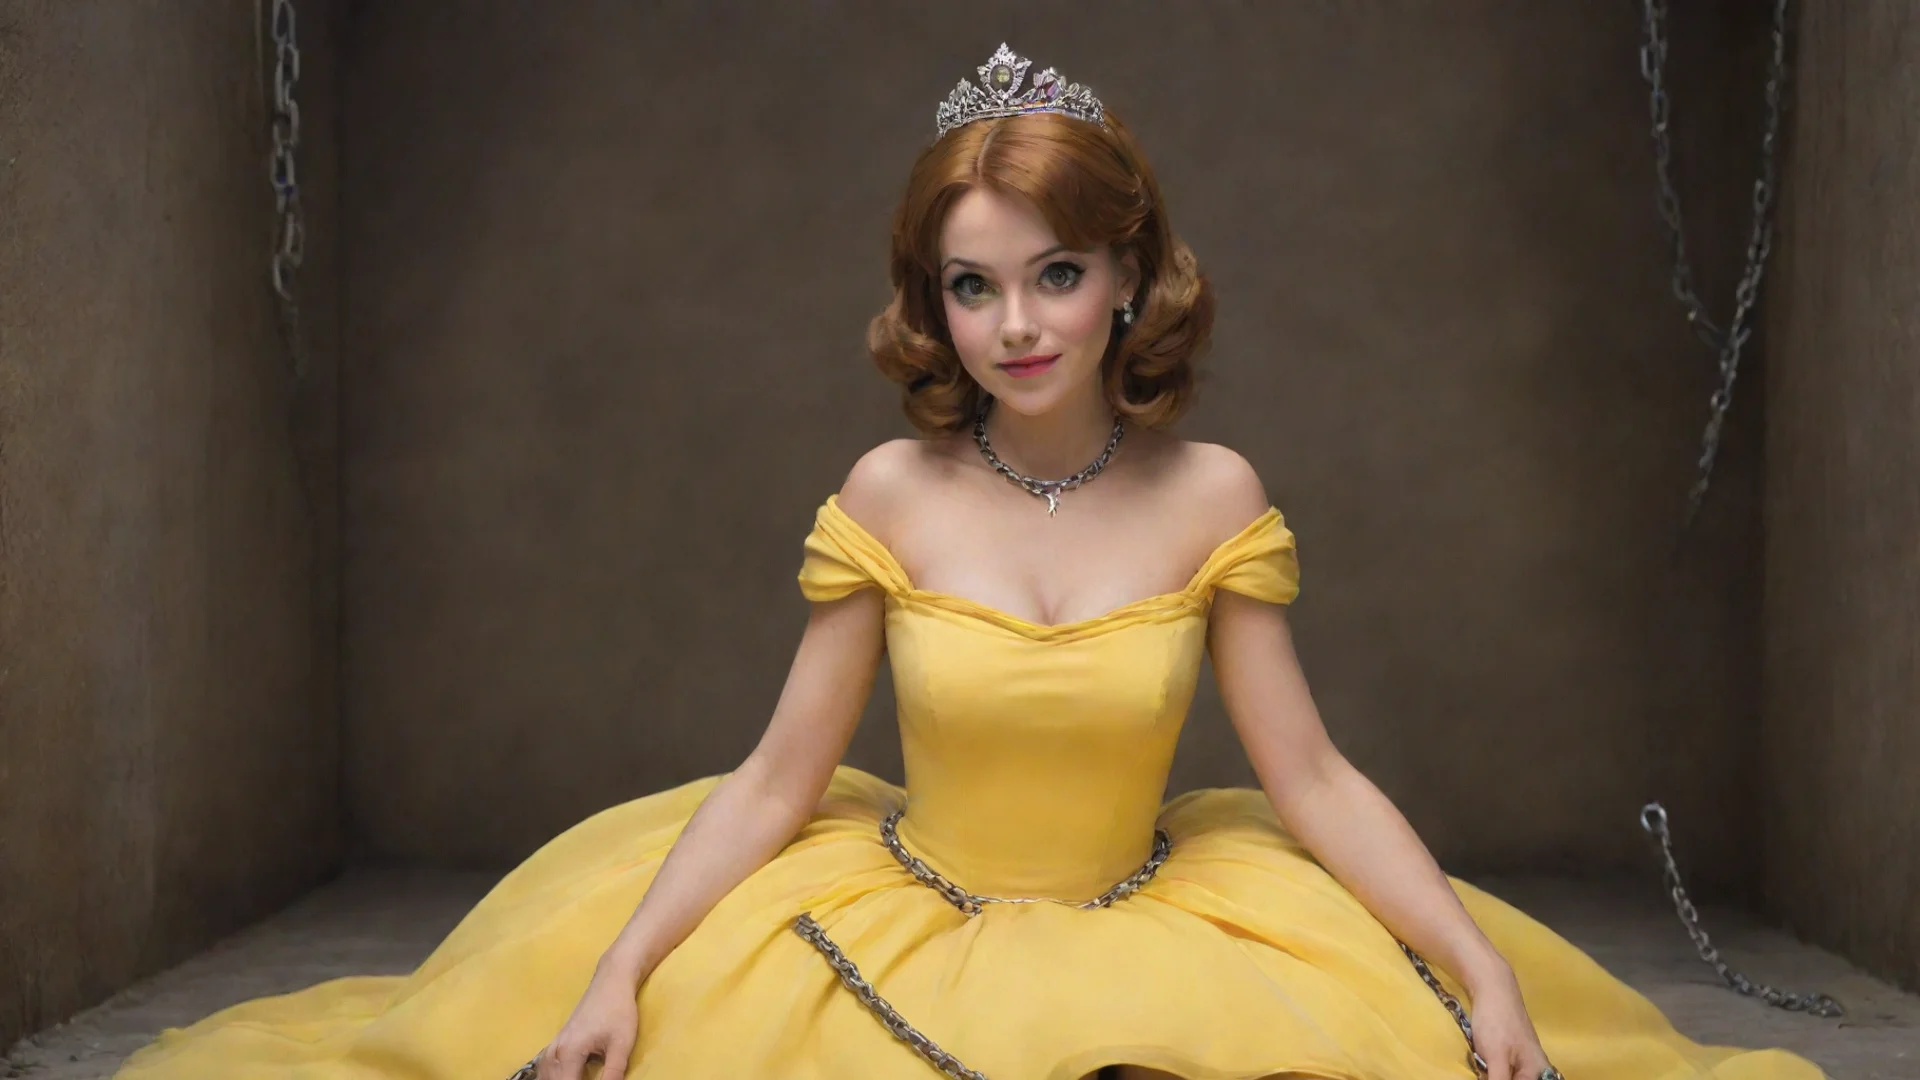 amazing princess daisy restrained by chains in her yellow dress awesome portrait 2 wide